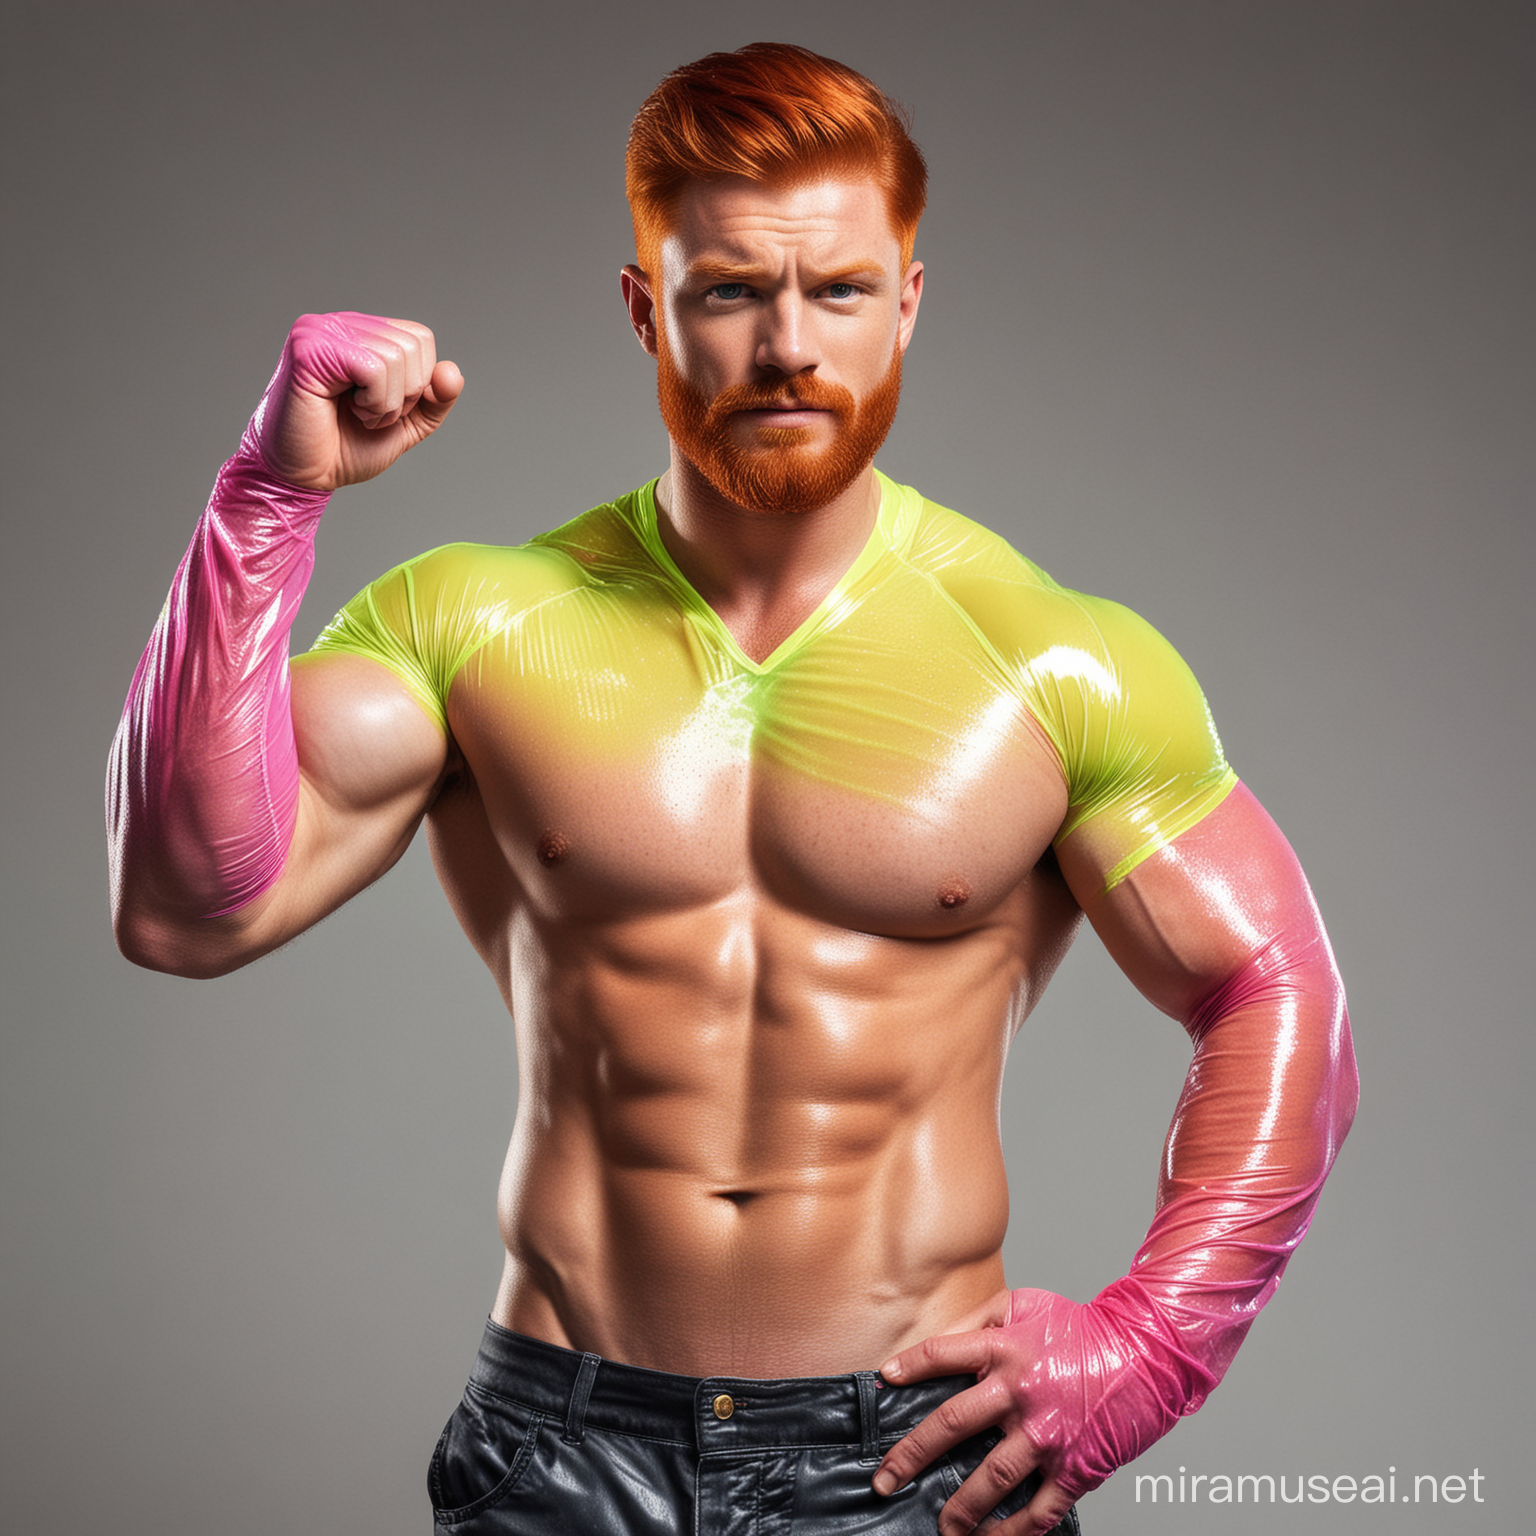 Ultra Muscular Red Head Worlds Strongest Man Flexing Arm in Bright Highlighter MultiColoured Jacket